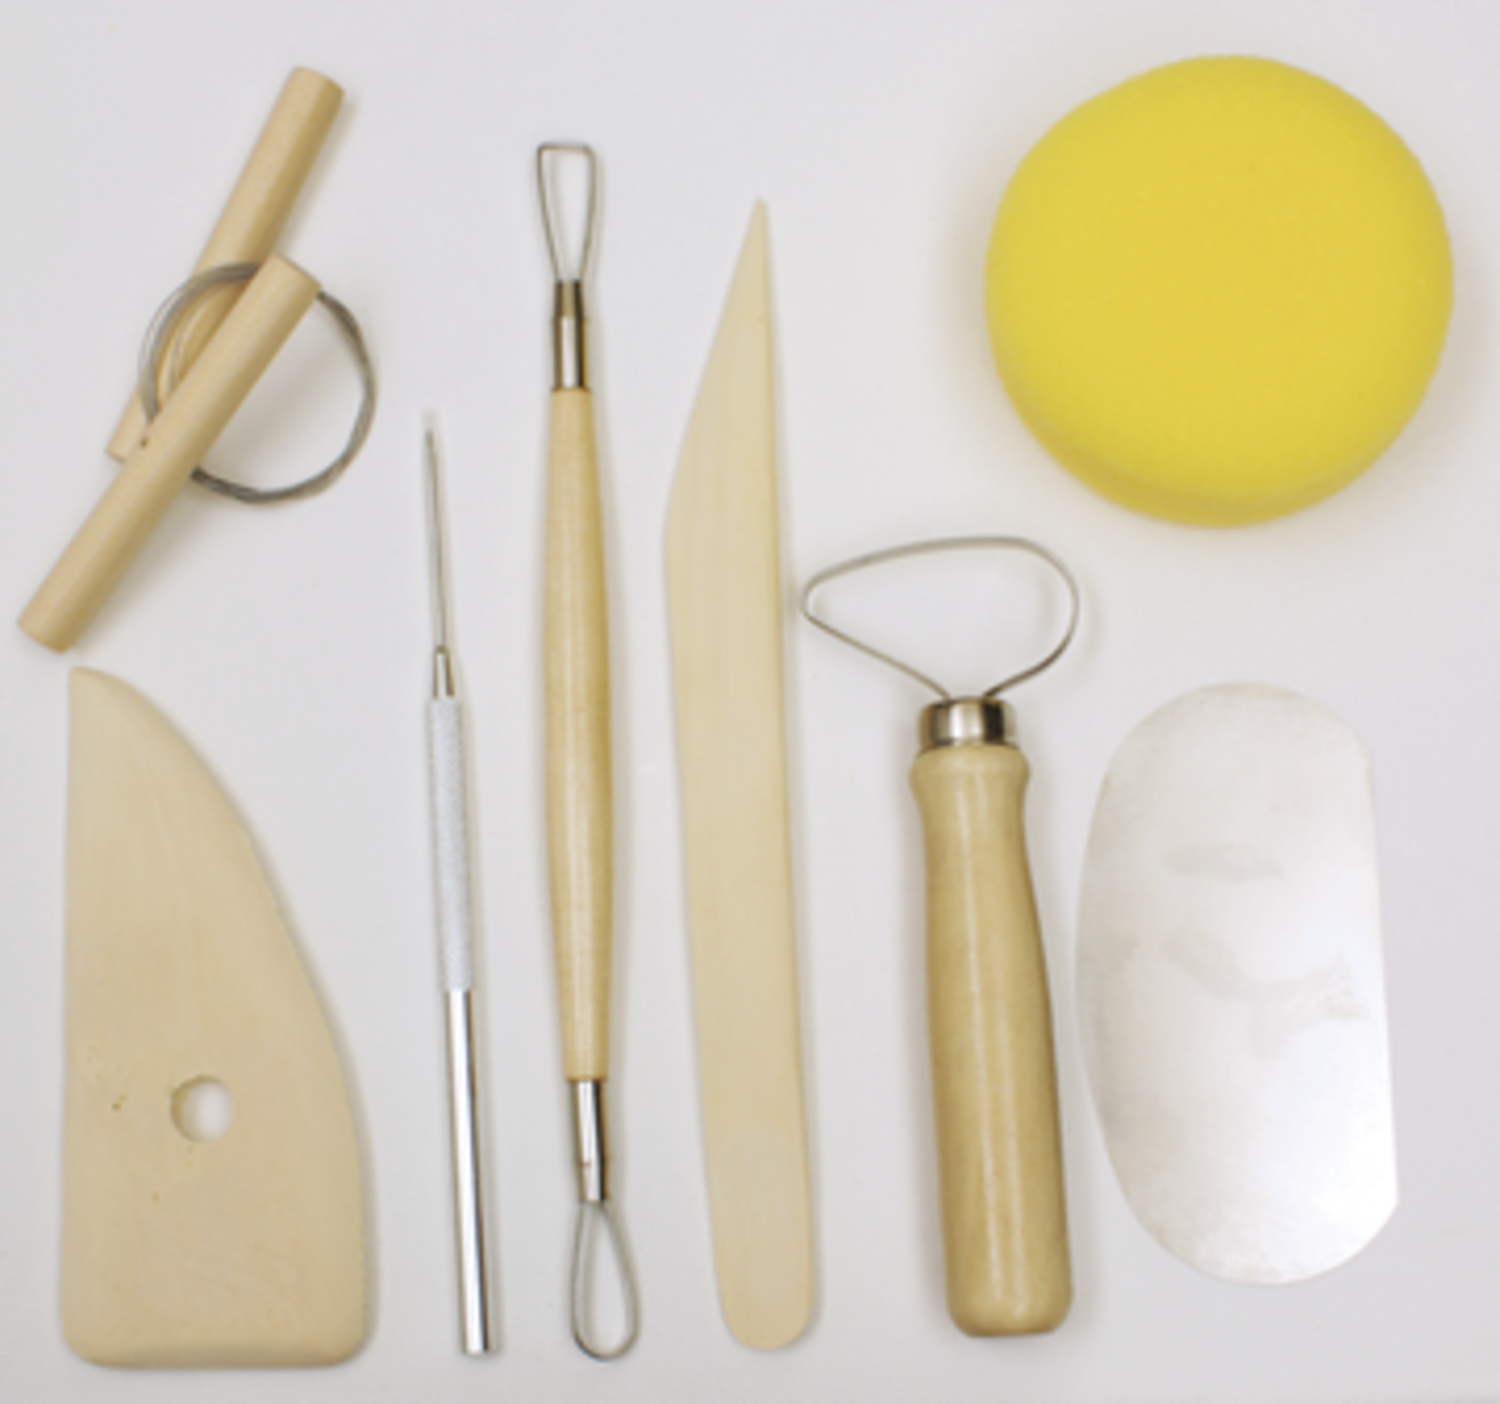 8 Pcs Pottery Tools Set, Starter Kit Beginner Set for Working With Pottery,  Clay, and Ceramics. 